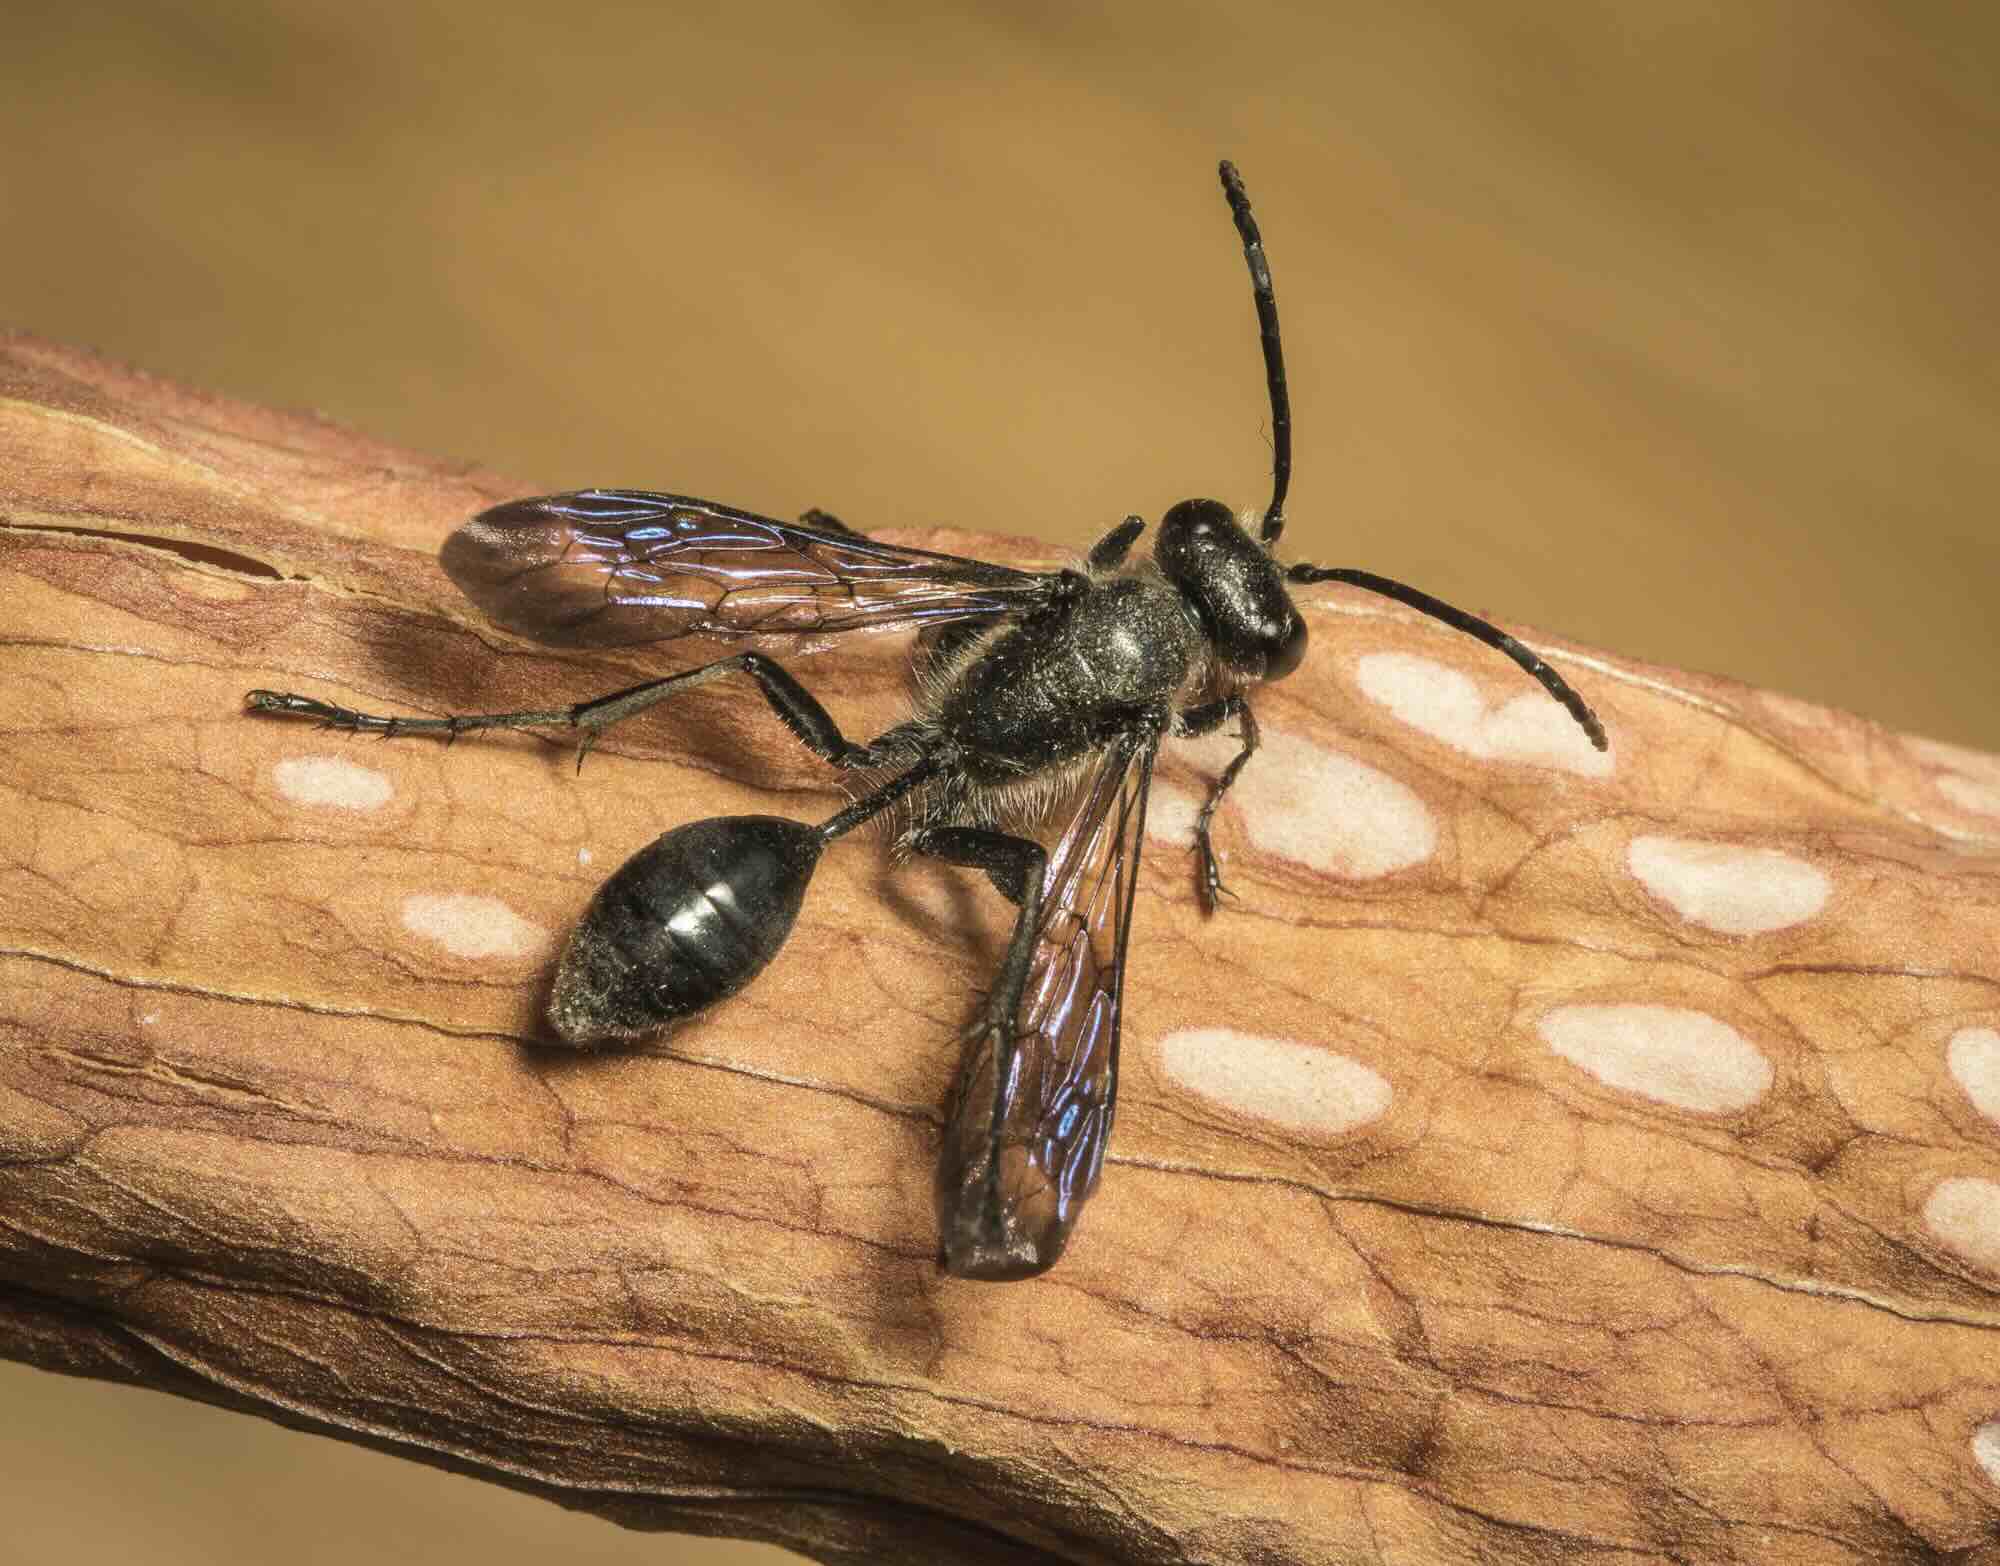 How To Get Rid Of Grass-Carrying Wasps